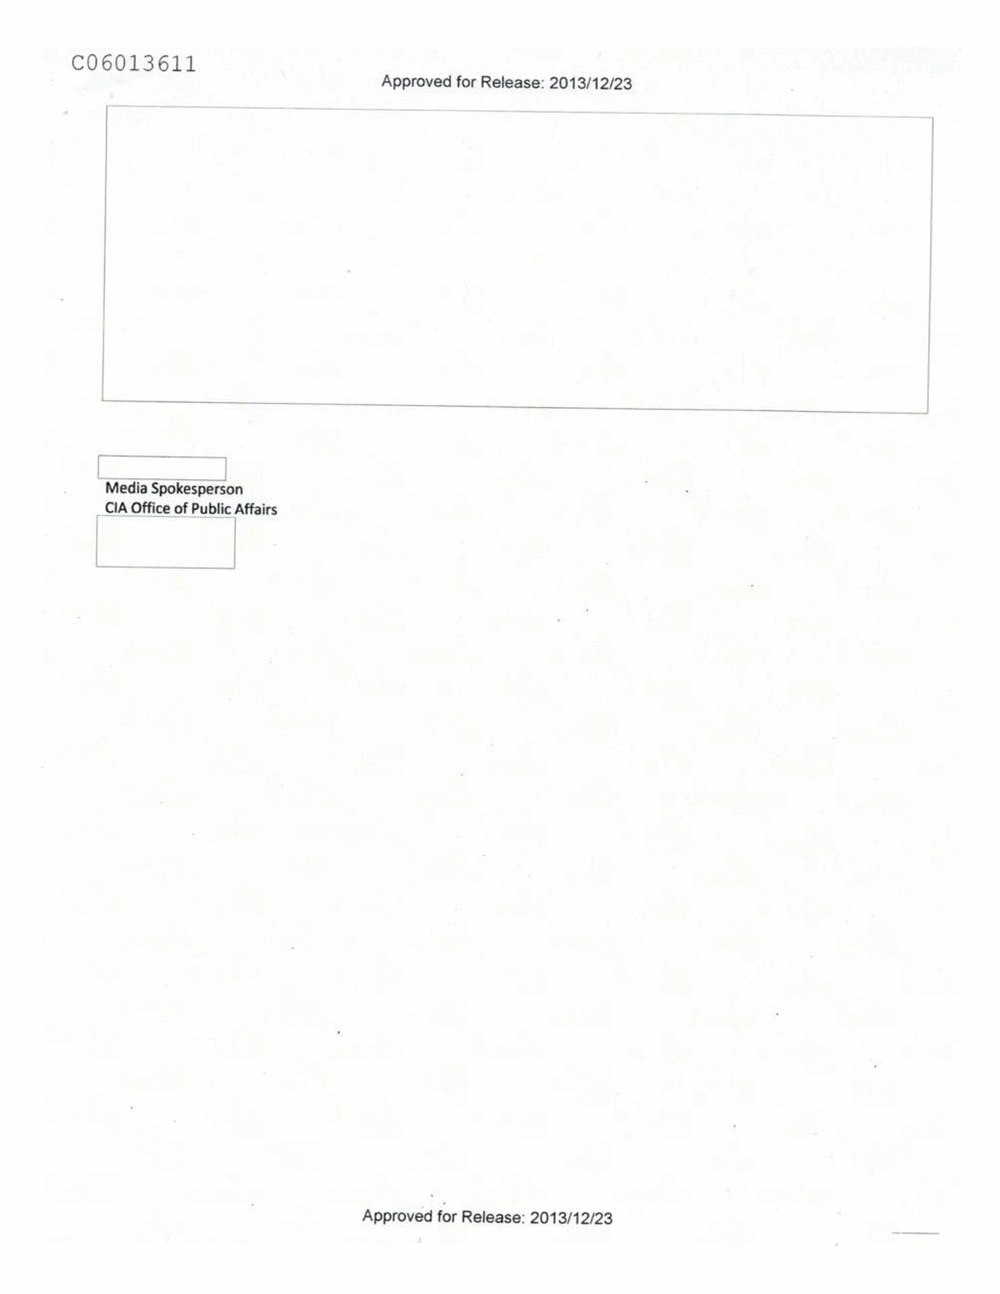 Page 430 from Email Correspondence Between Reporters and CIA Flacks